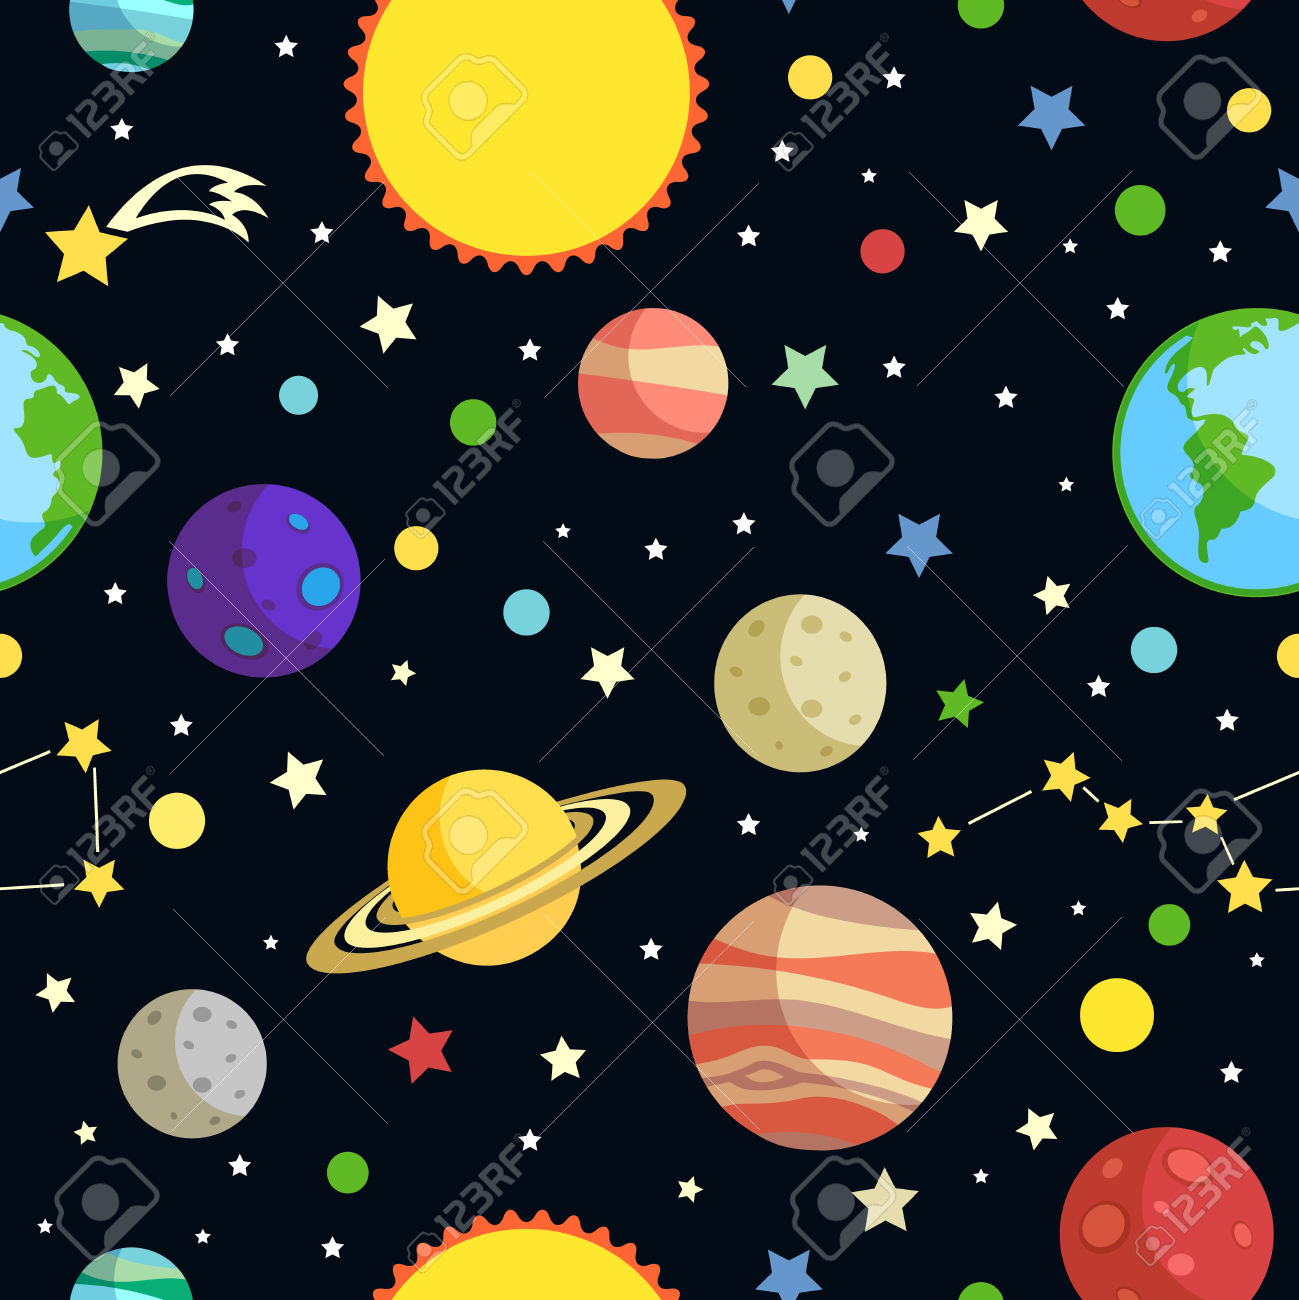 Free Space Background Cliparts, Download Free Clip Art, Free